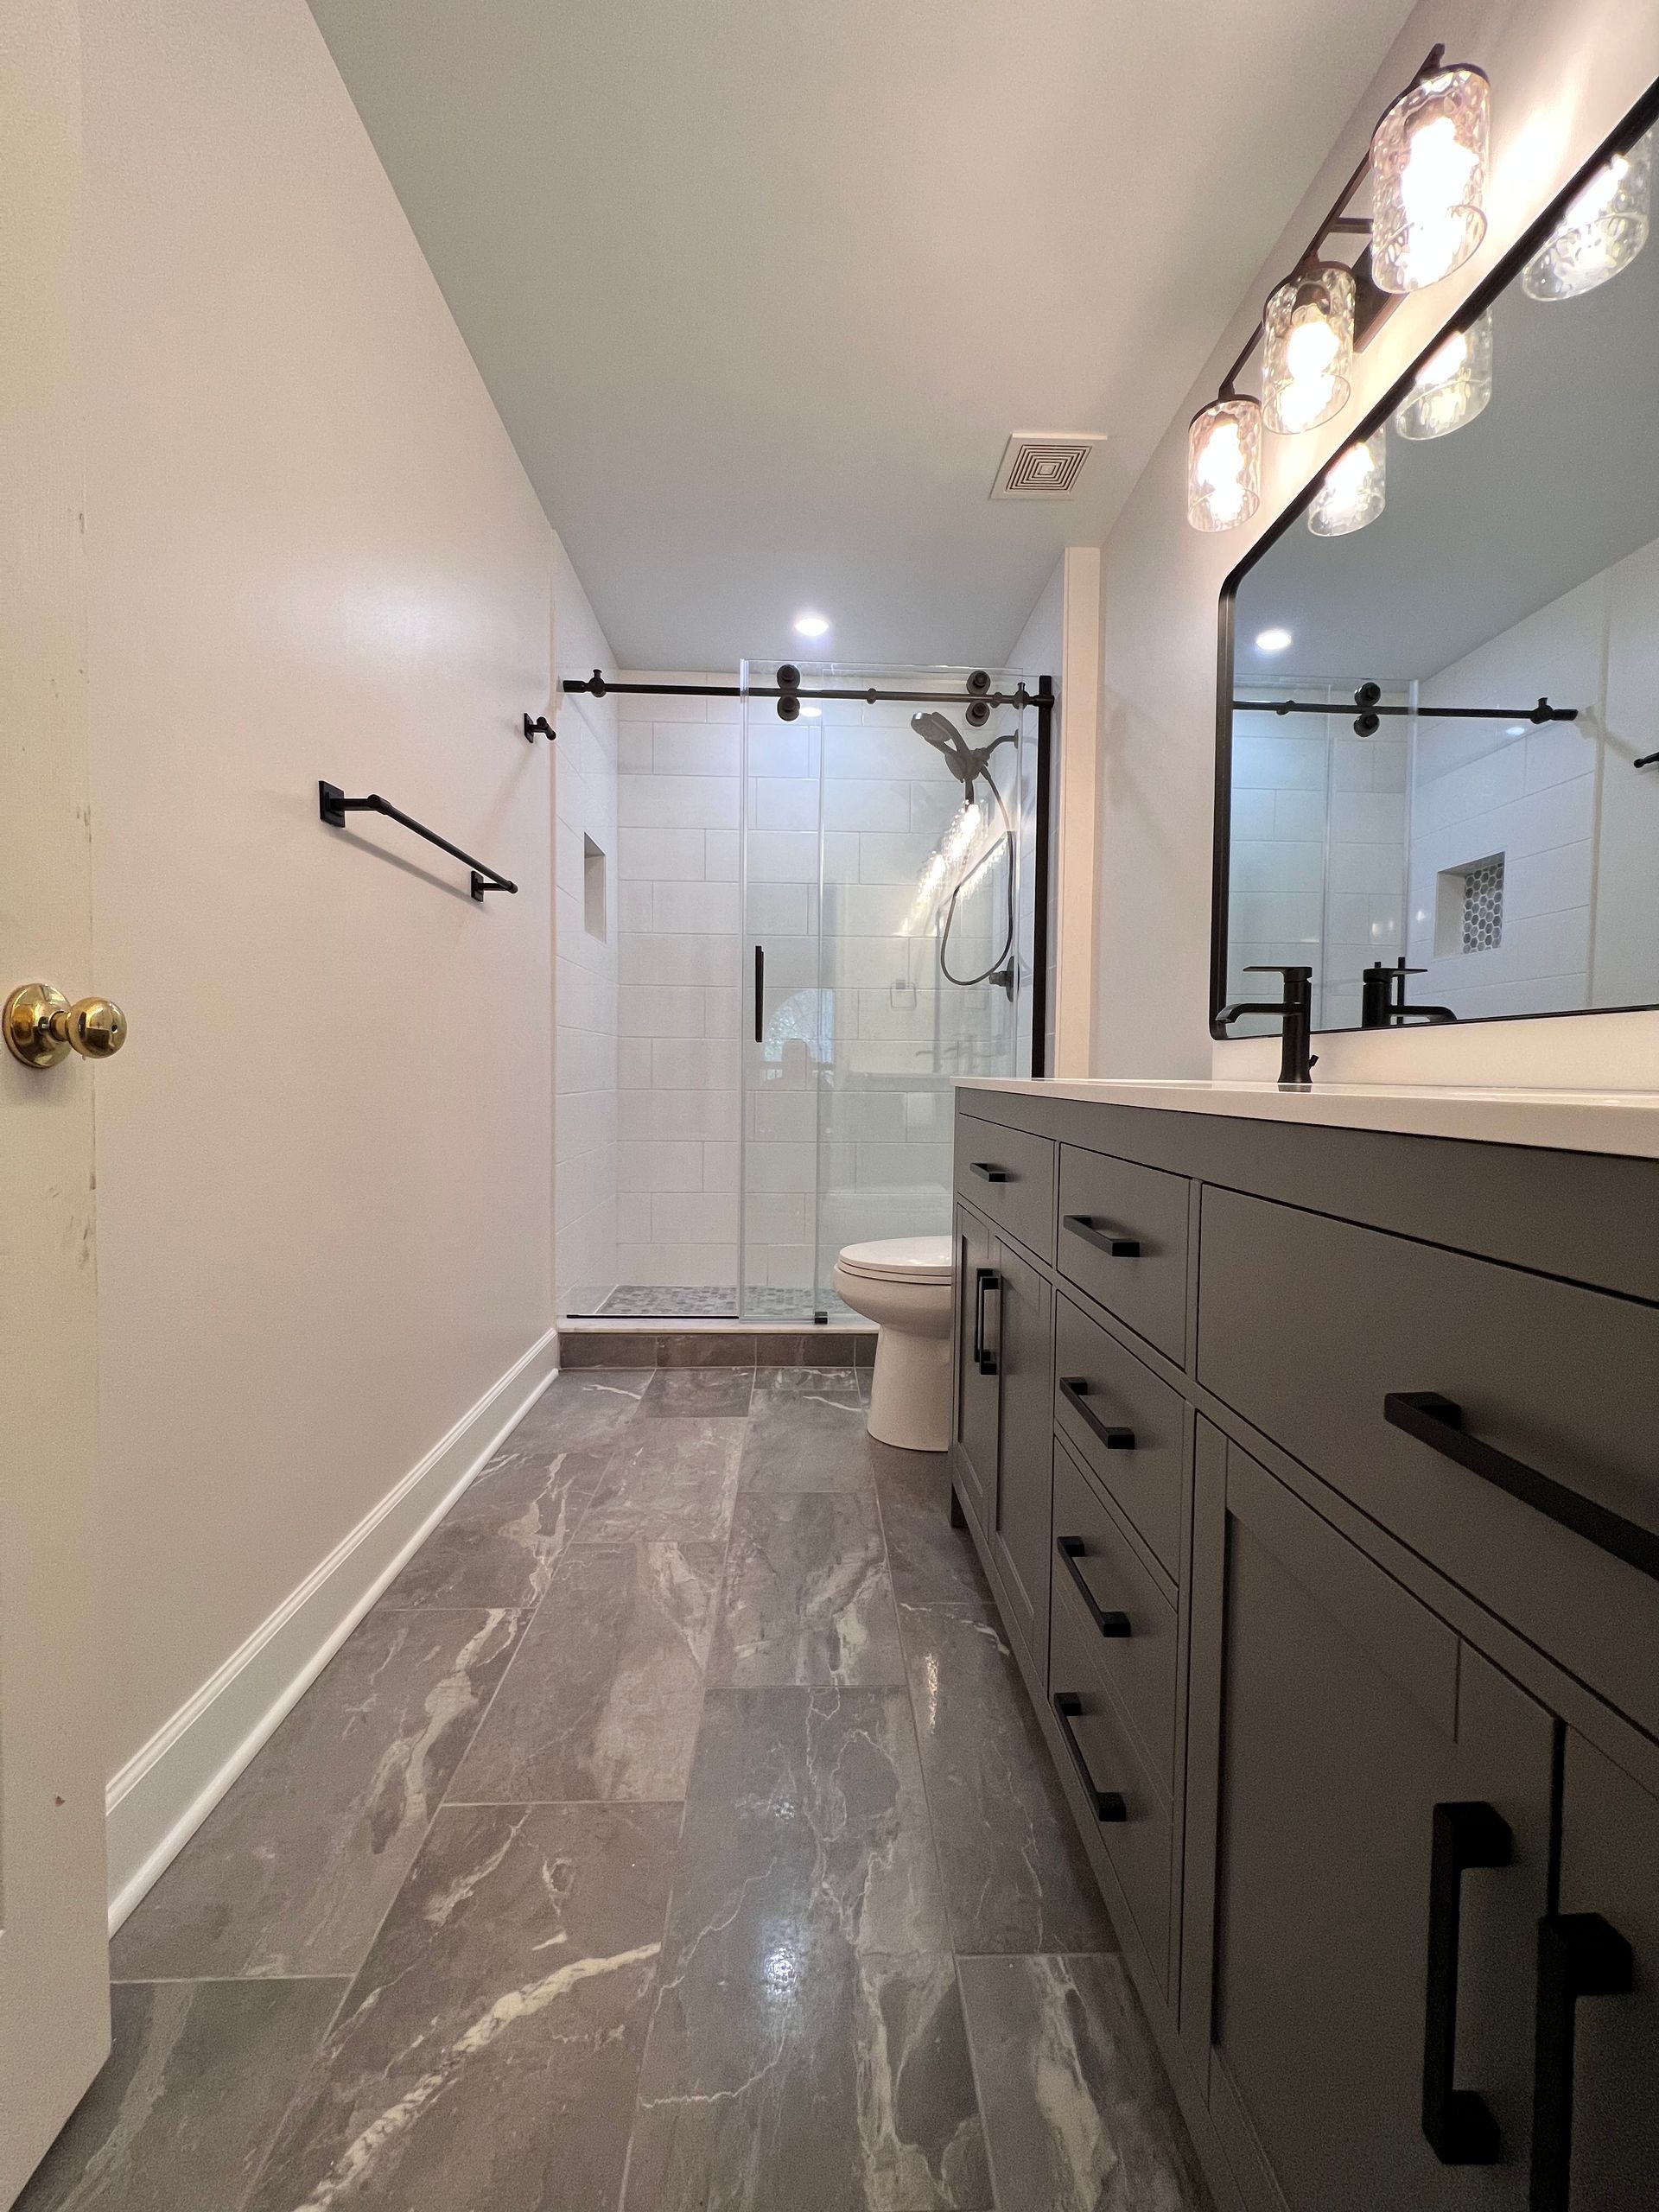 Before and after images for bathroom remodels. Bathroom design ideas And remodeling costs.